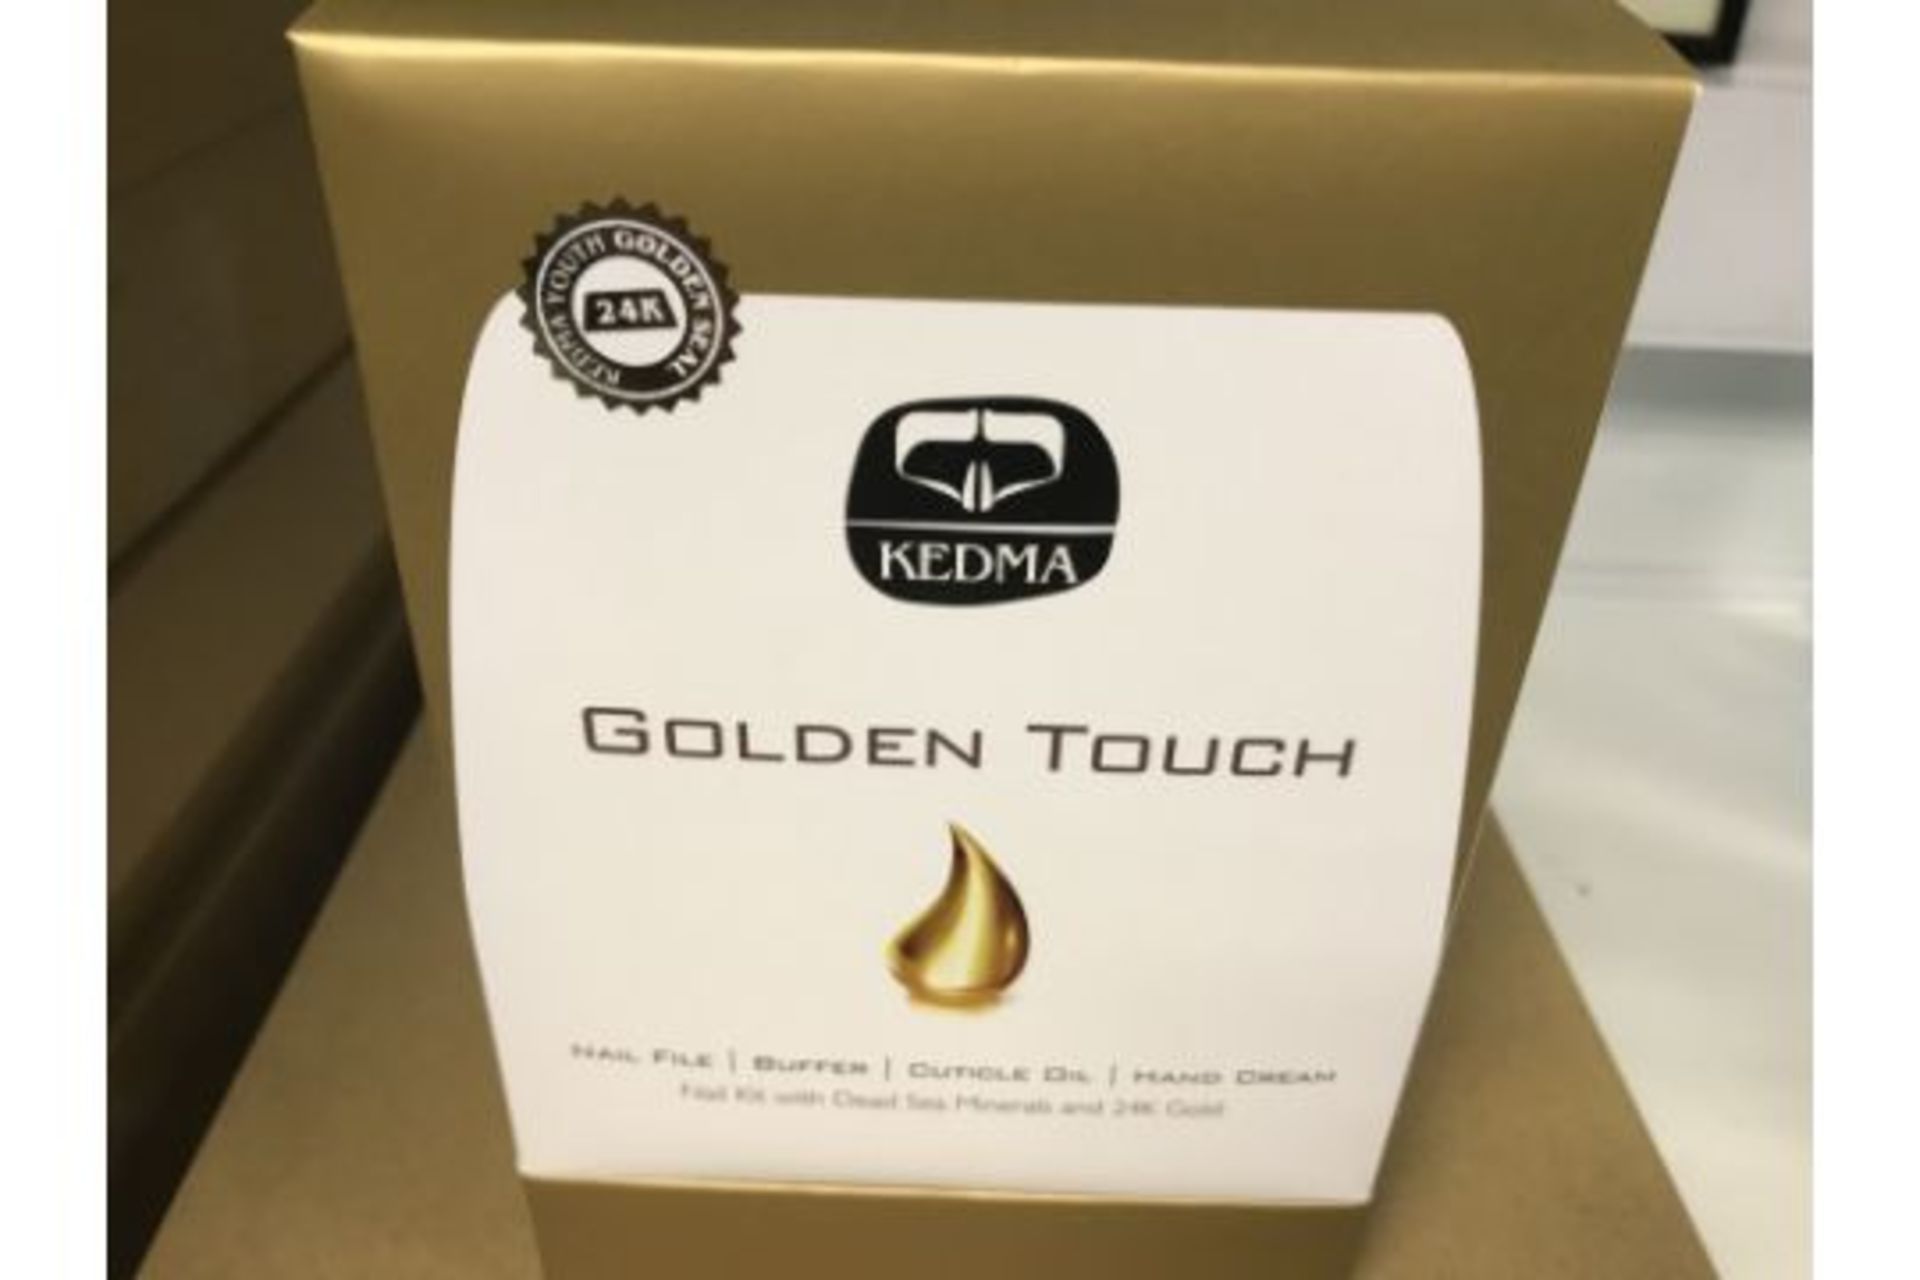 KEDMA GOLDEN TOUCH NAIL KIT WITH DEAD SEA MINERALS AND 24K GOLD, EACH SET CONTAINS NAIL FILE,